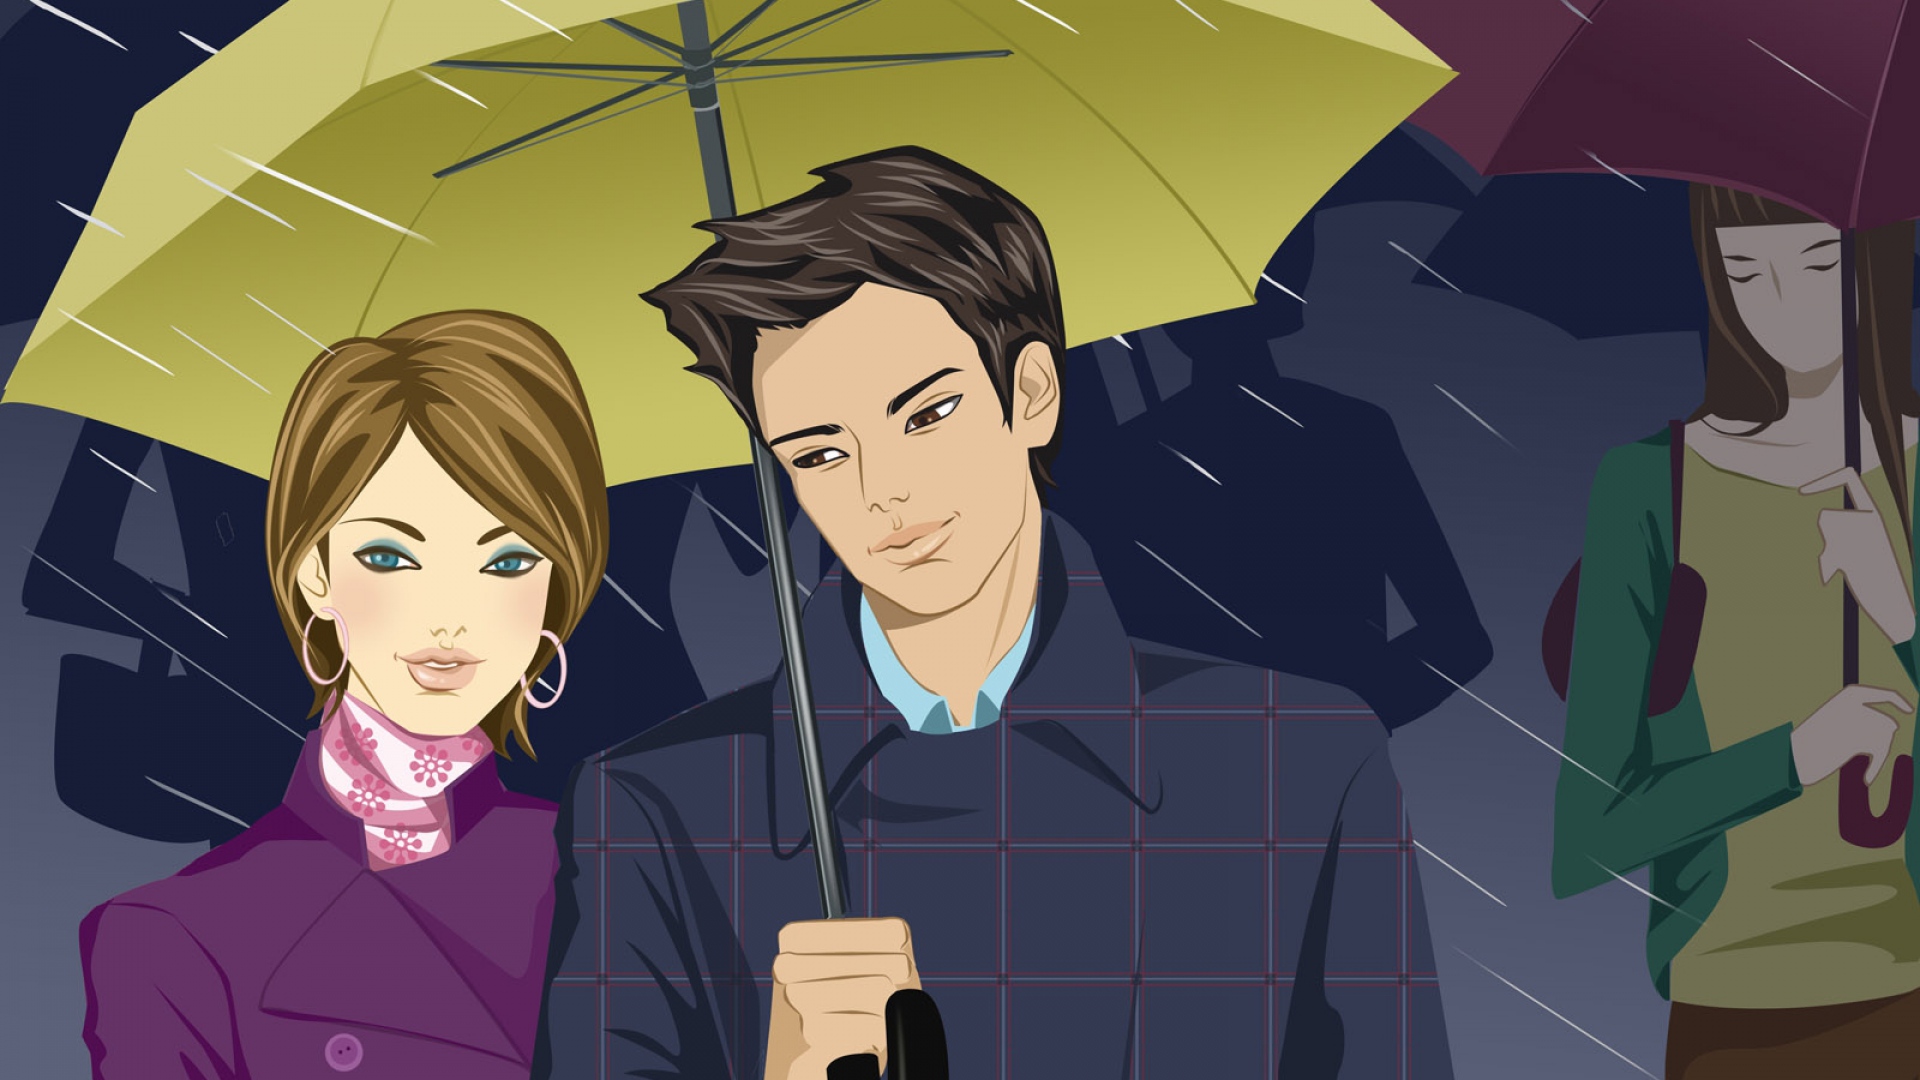 Wallpaper Young Couple Heavy Rain Together Shadow Drawn - Love Cute Shadow Images Full Hd 1080p - HD Wallpaper 